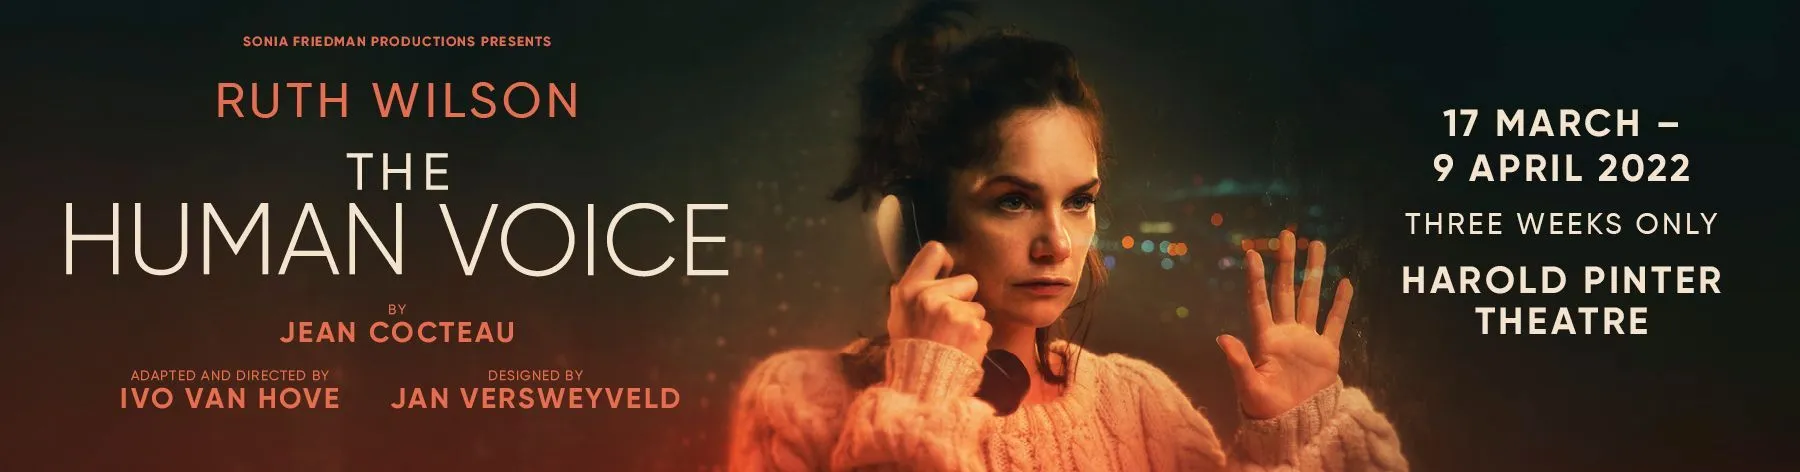 The Human Voice stars the two-time Olivier Award-winning actress Ruth Wilson. Book The Human Voice London tickets now.